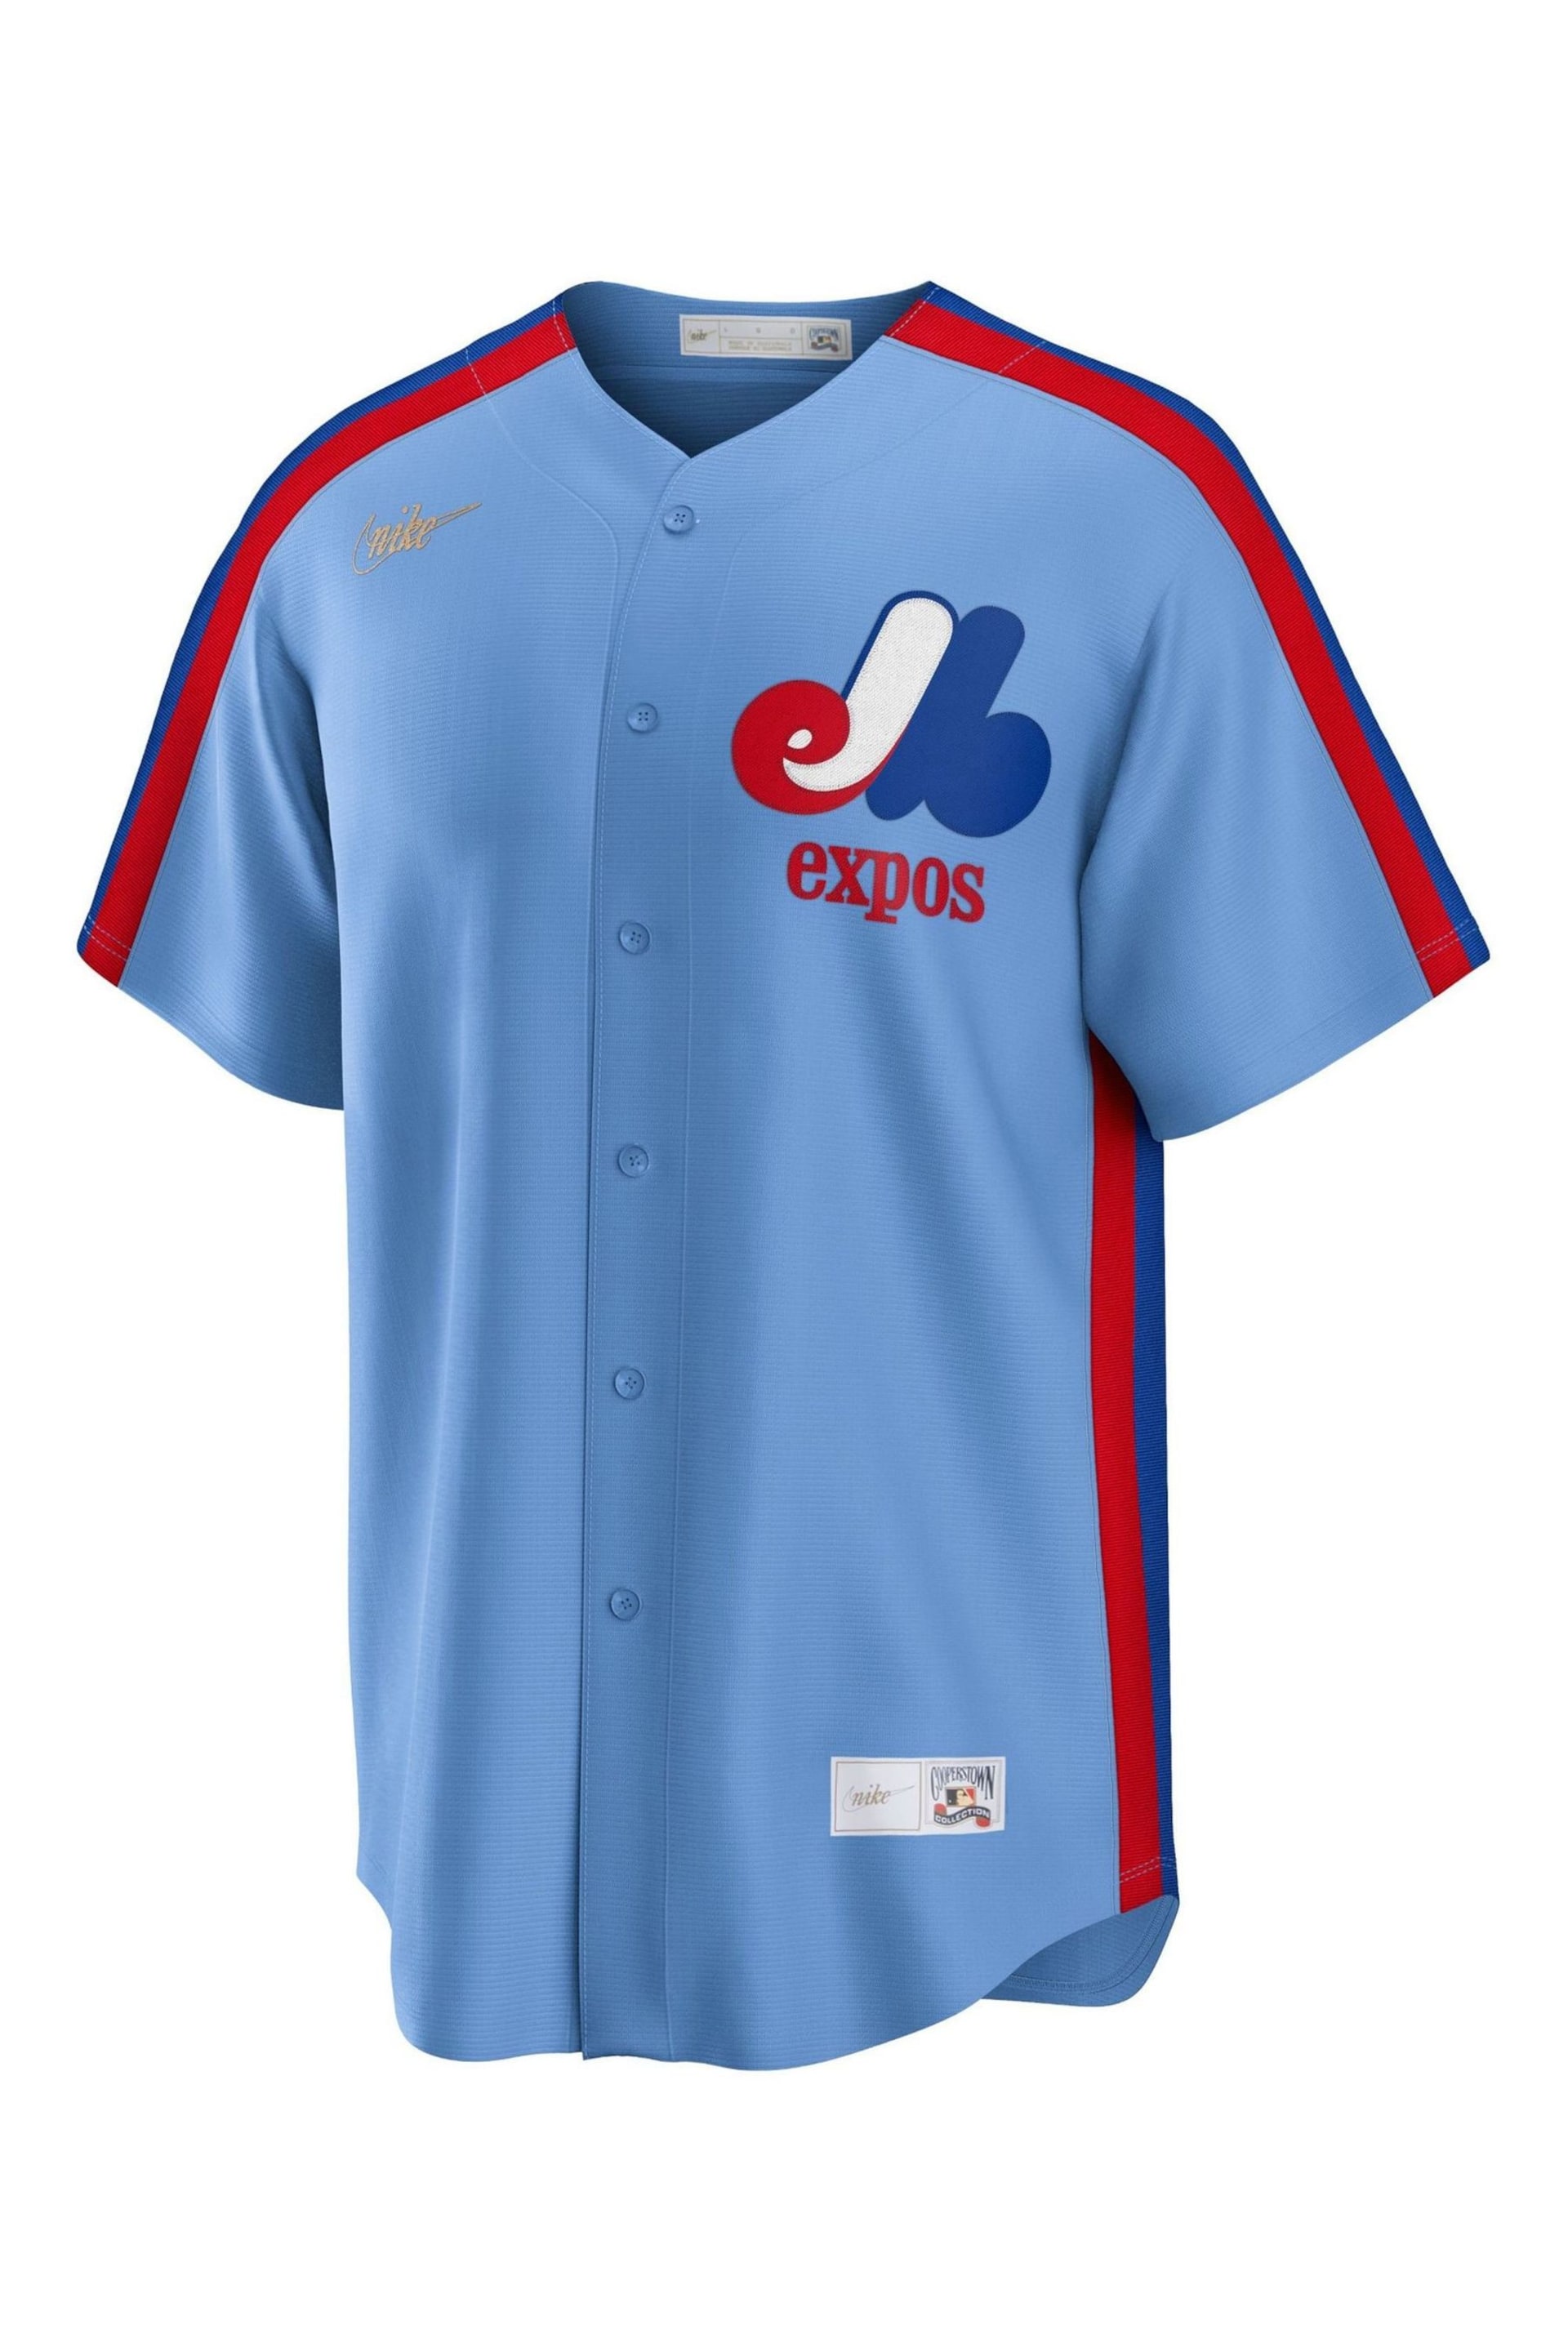 Nike Blue Montreal Expos Nike Official Replica Cooperstown 1982 Jersey - Image 2 of 3